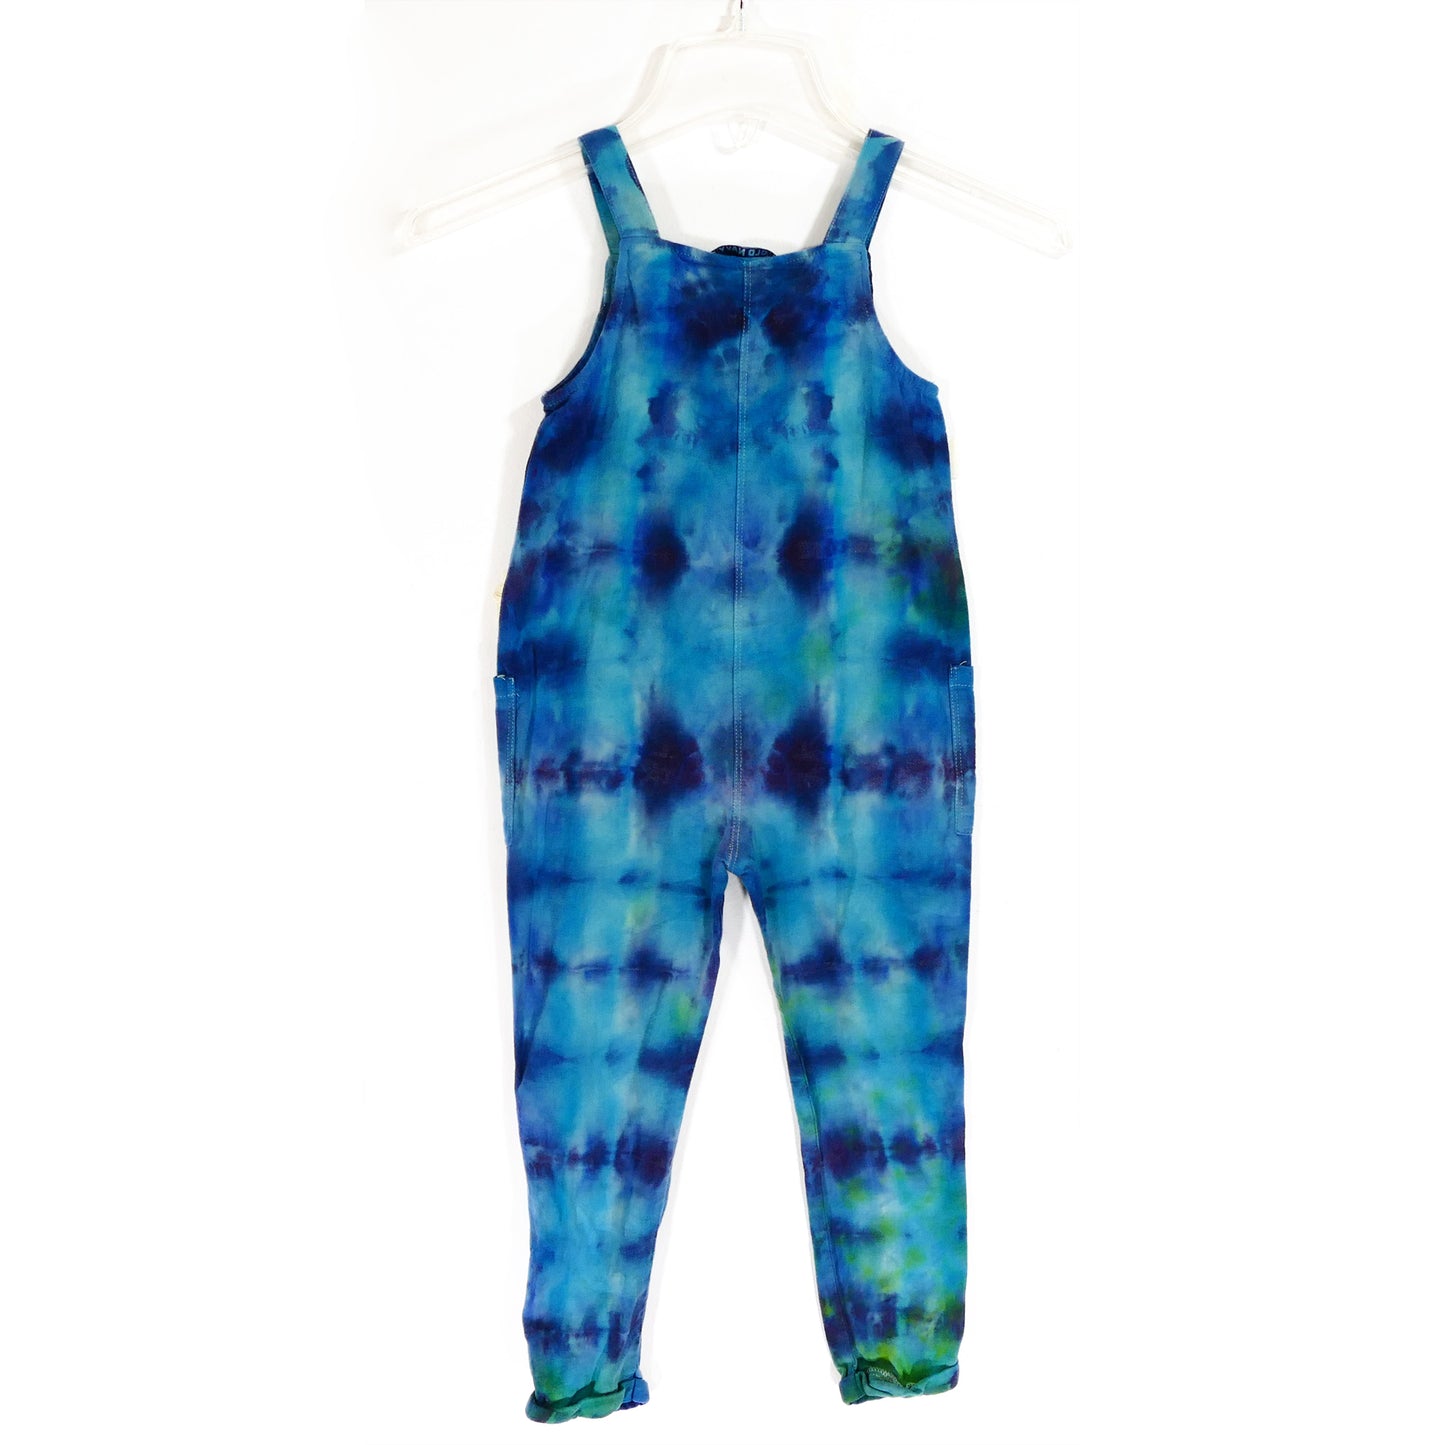 5T blue stripes and spots Toddleralls